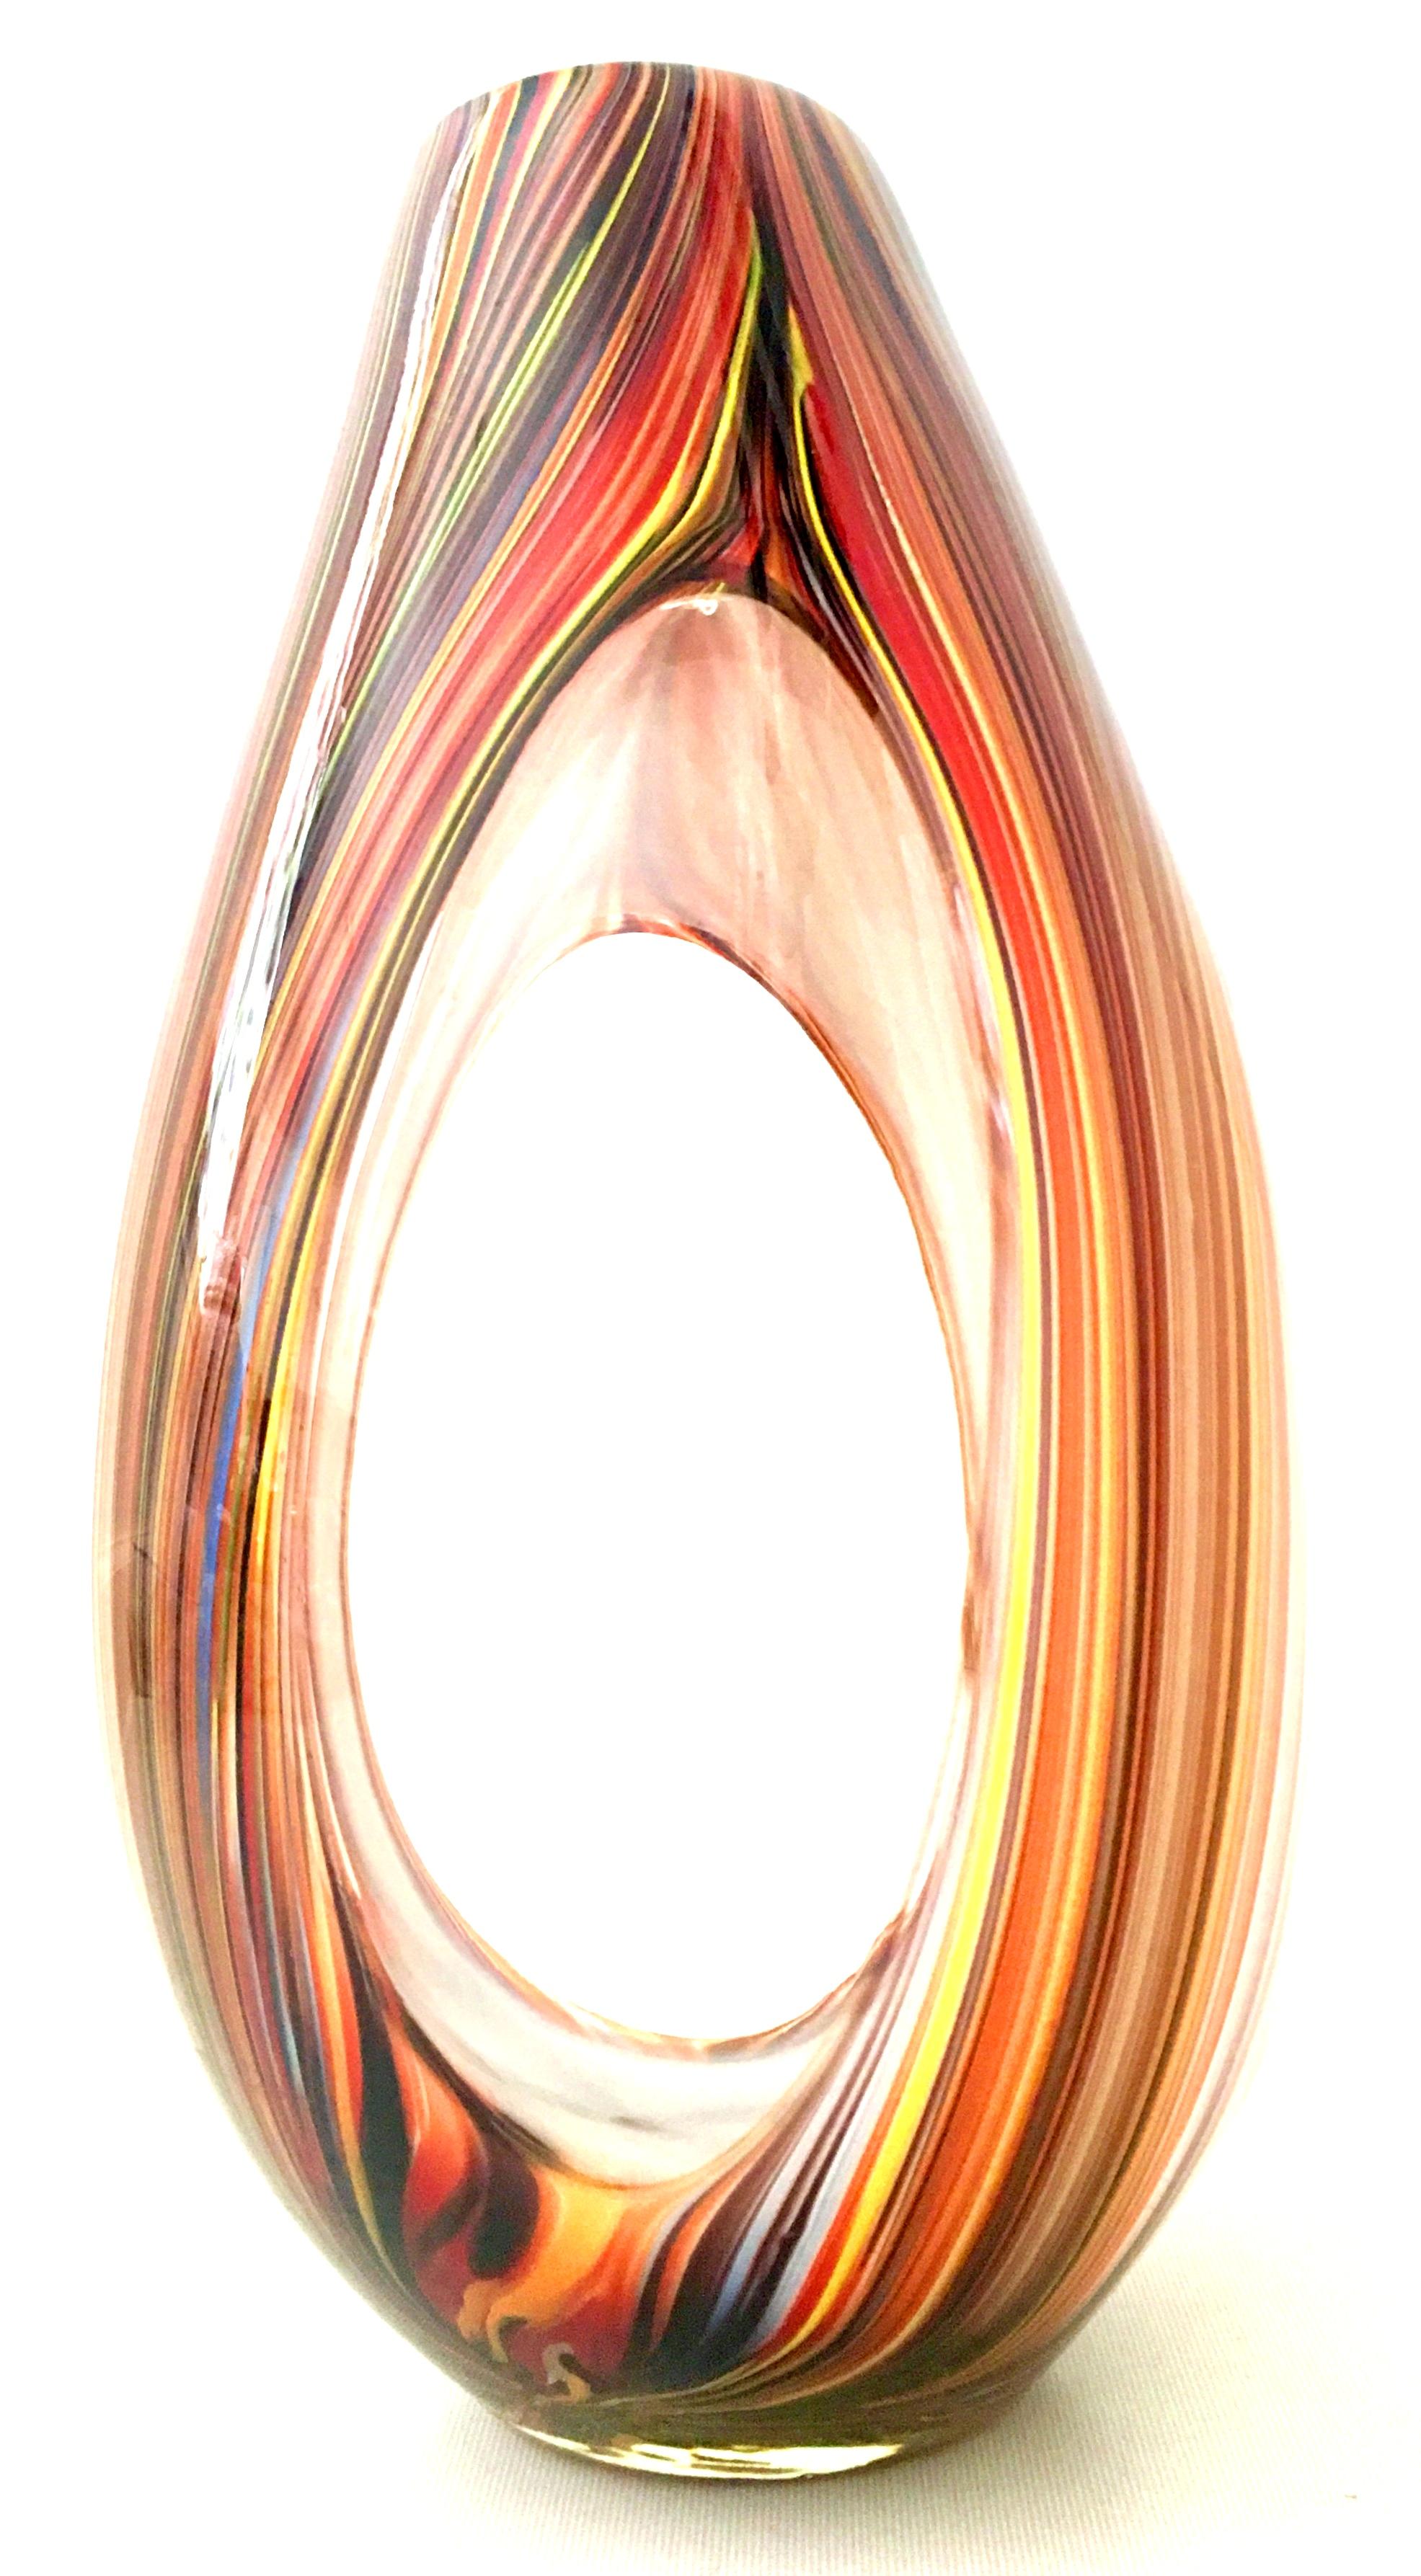 21st Century & New Missoni large modern optical striped blown glass vase. This new and never used ultra modern optical striped based designed by Missoni features a color palette with shades of orange, yellow, periwinkle, red and brown. This cased